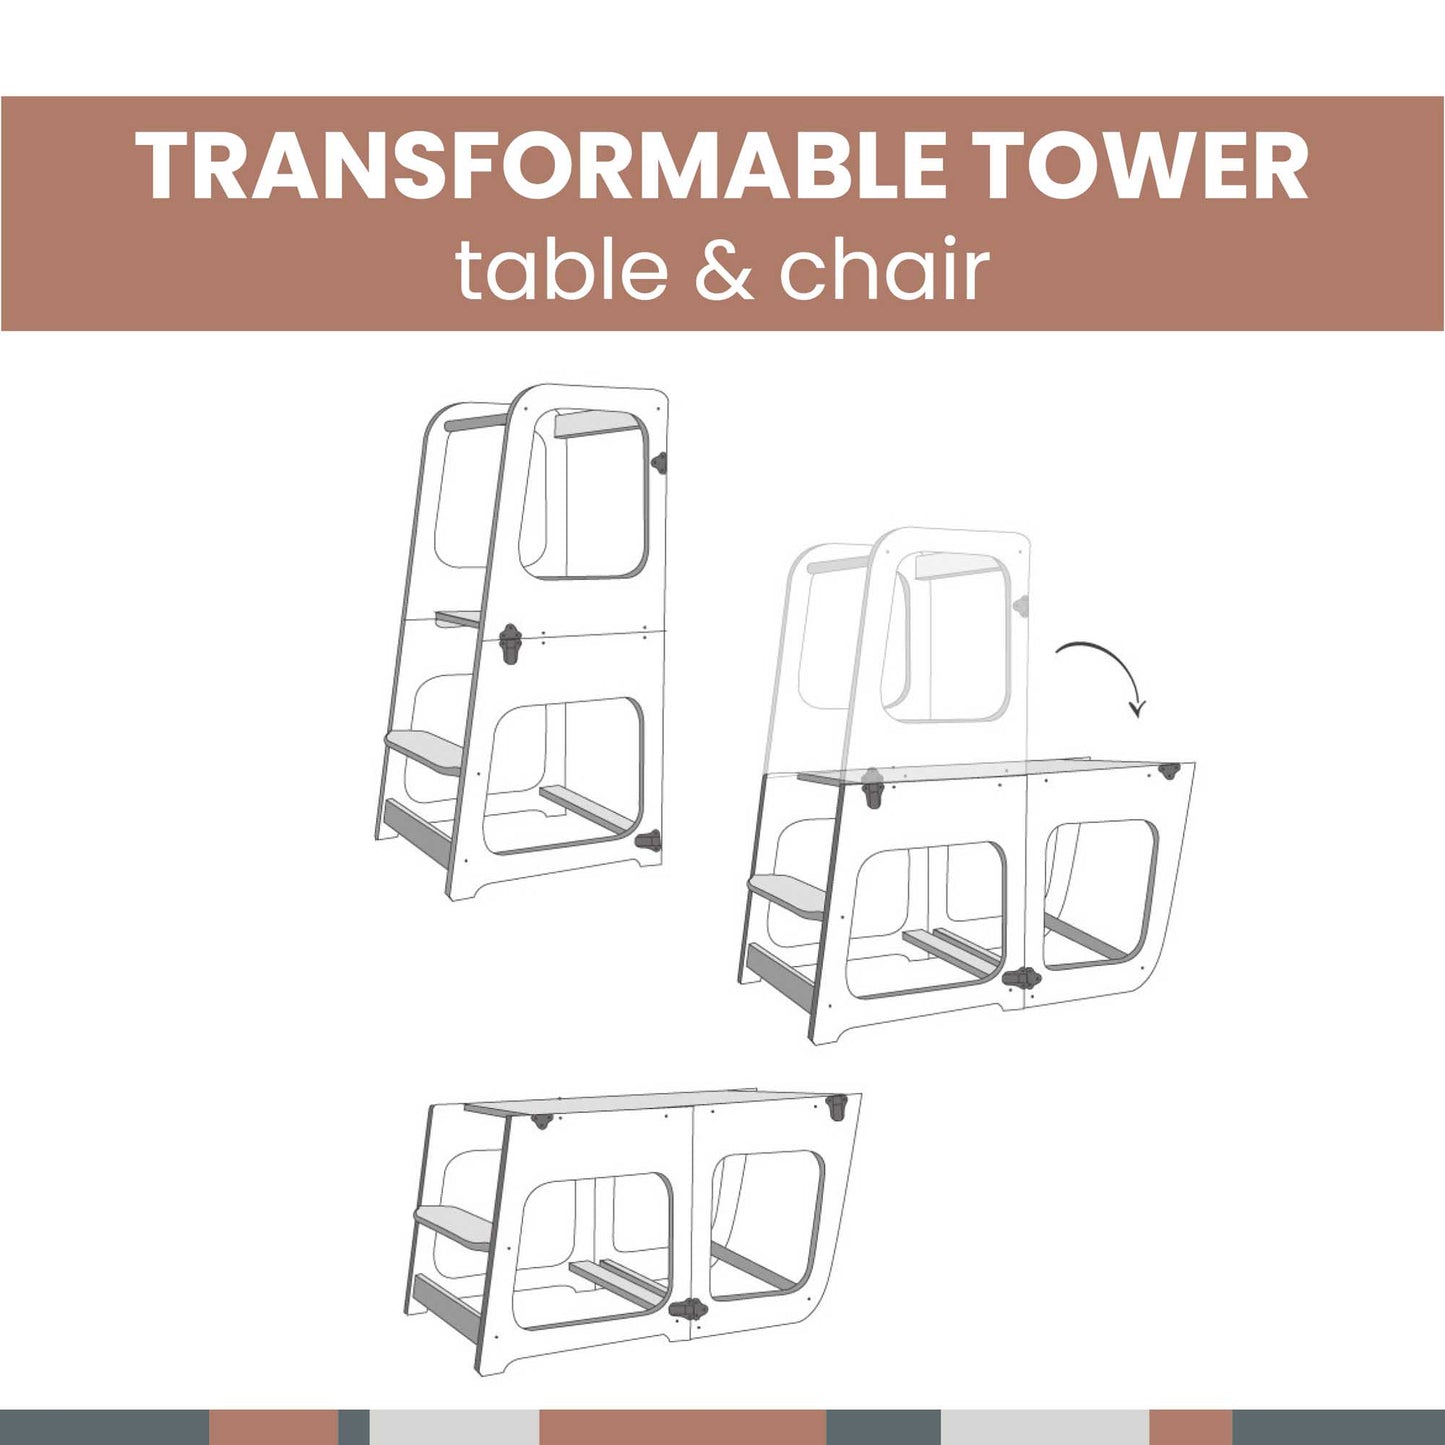 This versatile 2-in-1 Convertible kitchen tower - table and chair set is perfect for toddlers in the kitchen.